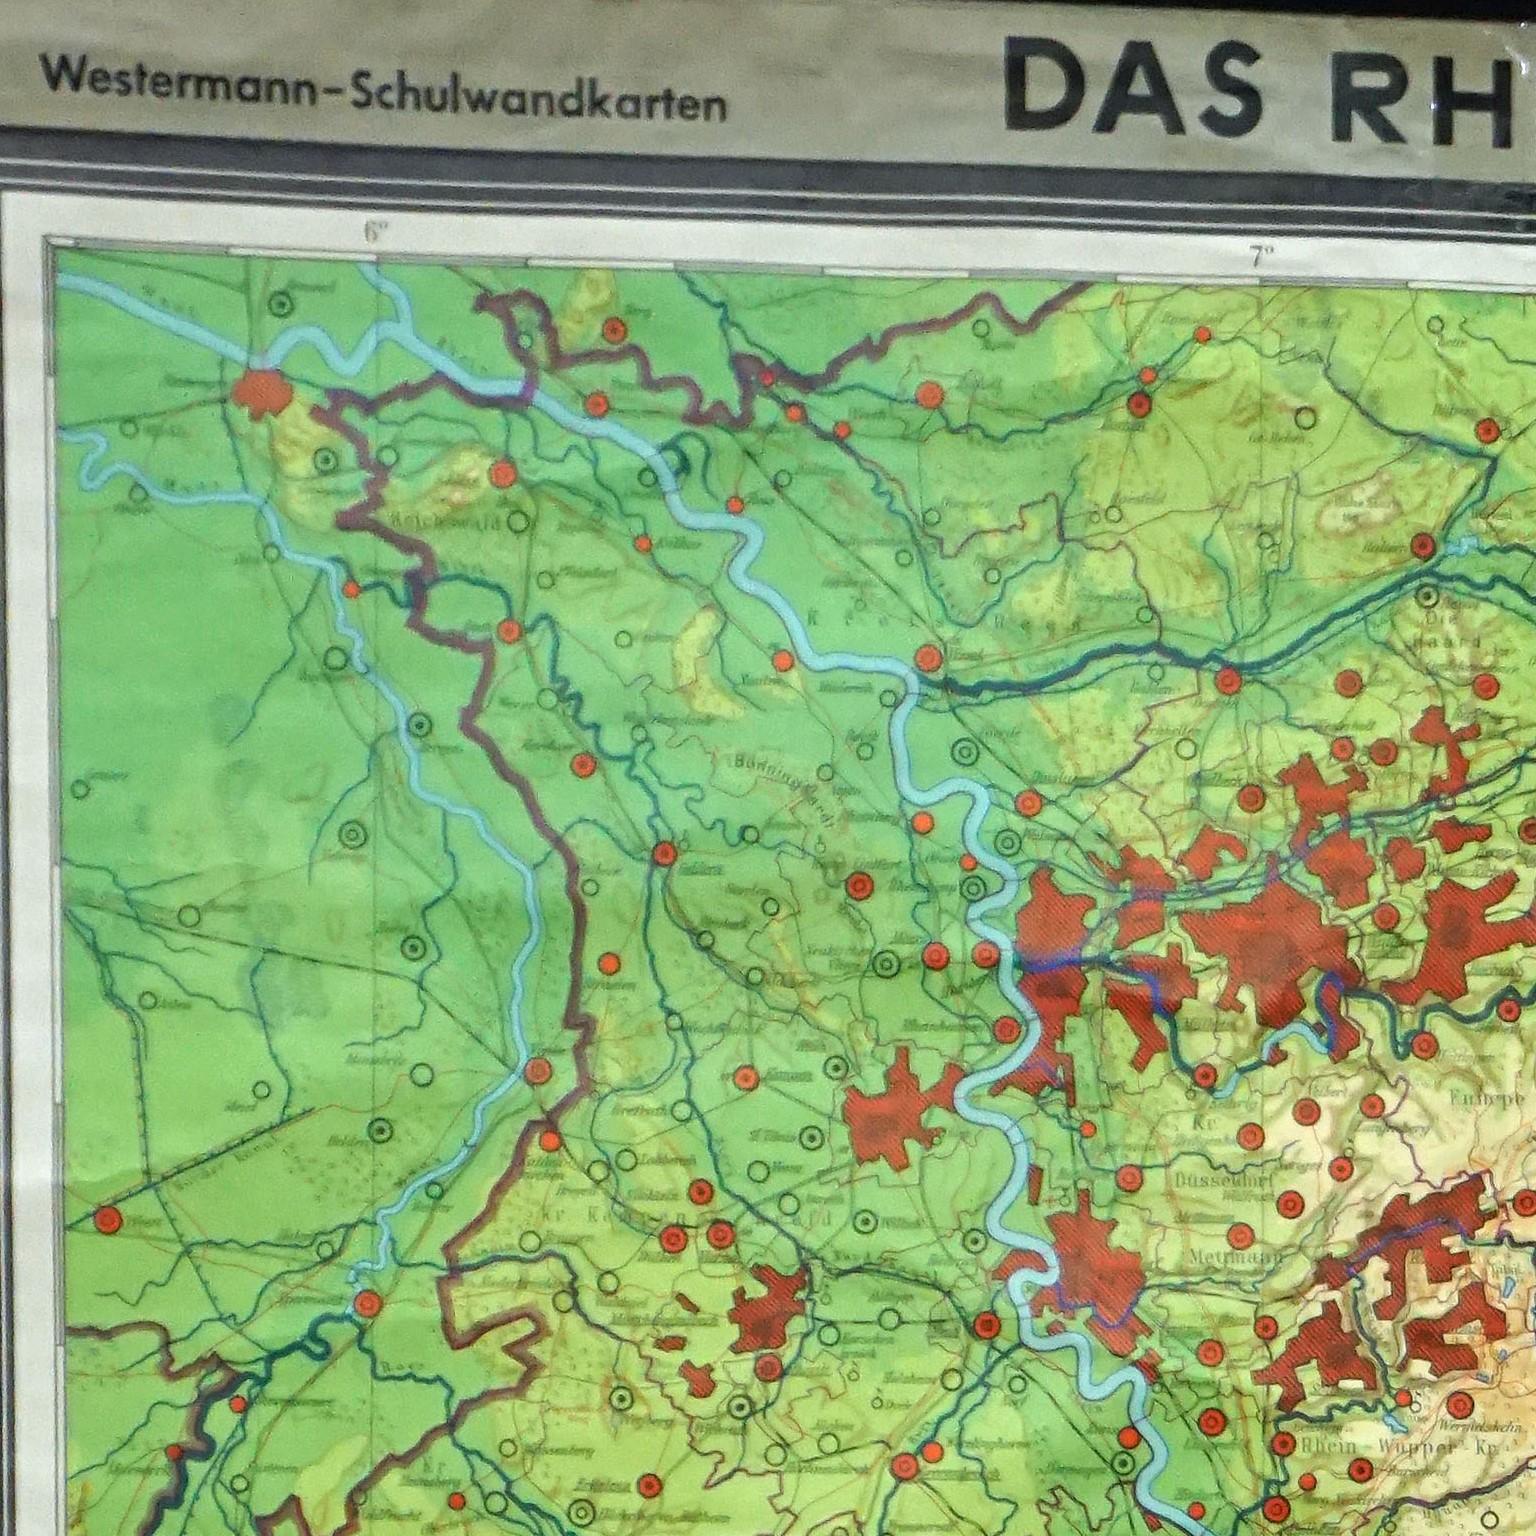 A country core vintage pull-down map illustrating the popular German region of the Rhineland, published by Westermann. Colorful print on paper reinforced with canvas.
Measurements:
Width 147 cm (57.87 inch)
Height 212.50 cm (83.66 inch)

The